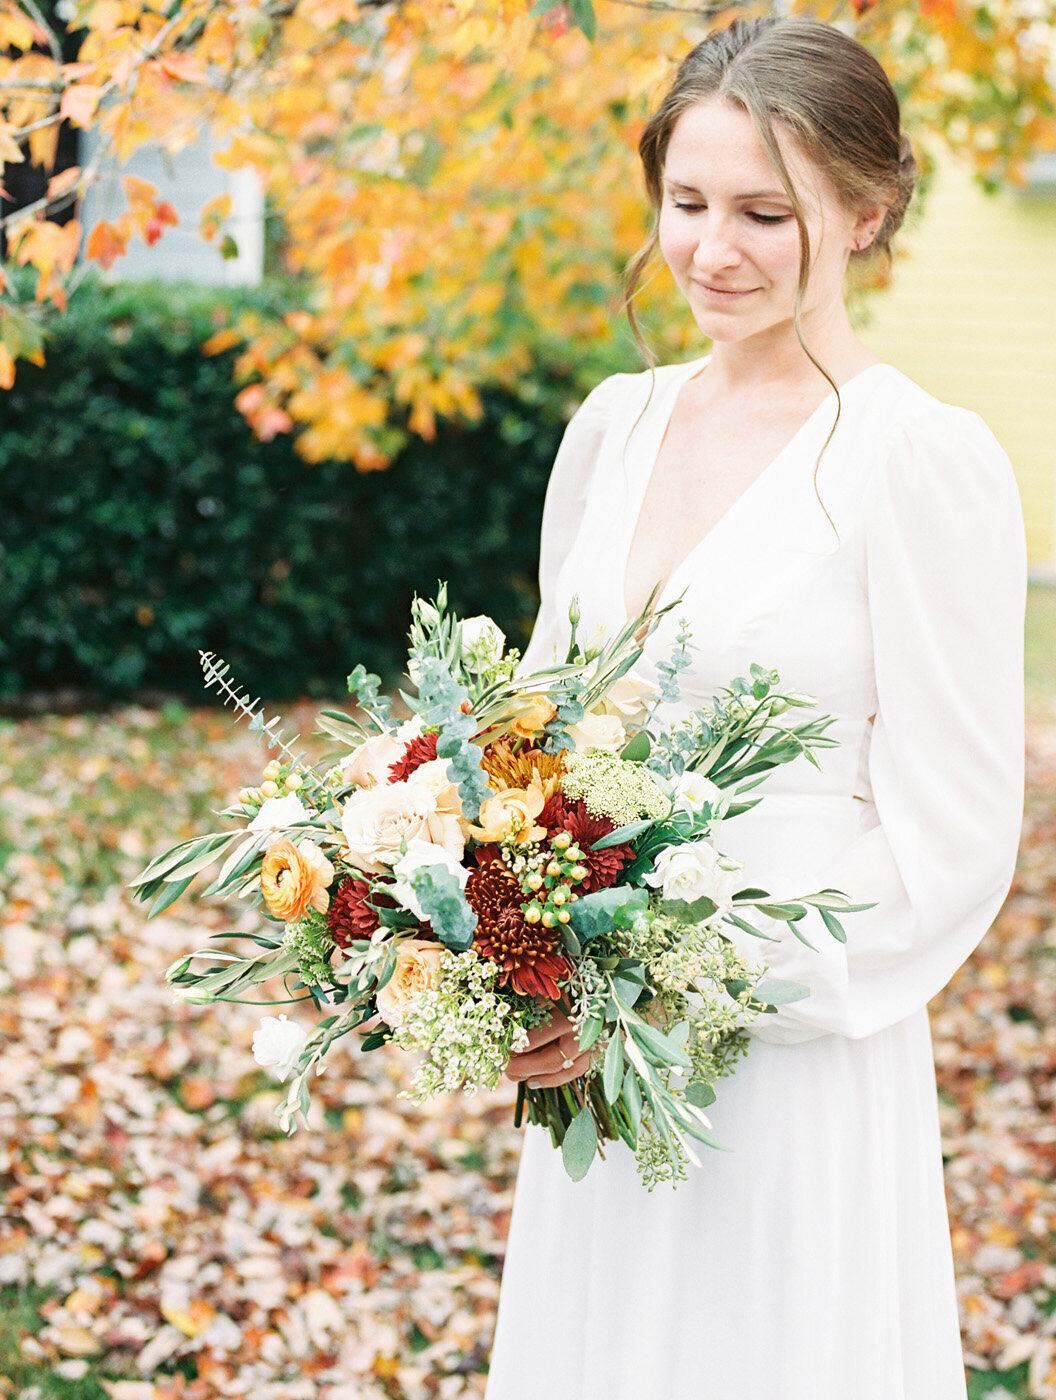 Raleigh Event Elopement Photographer | Jessica Agee Photography - 009